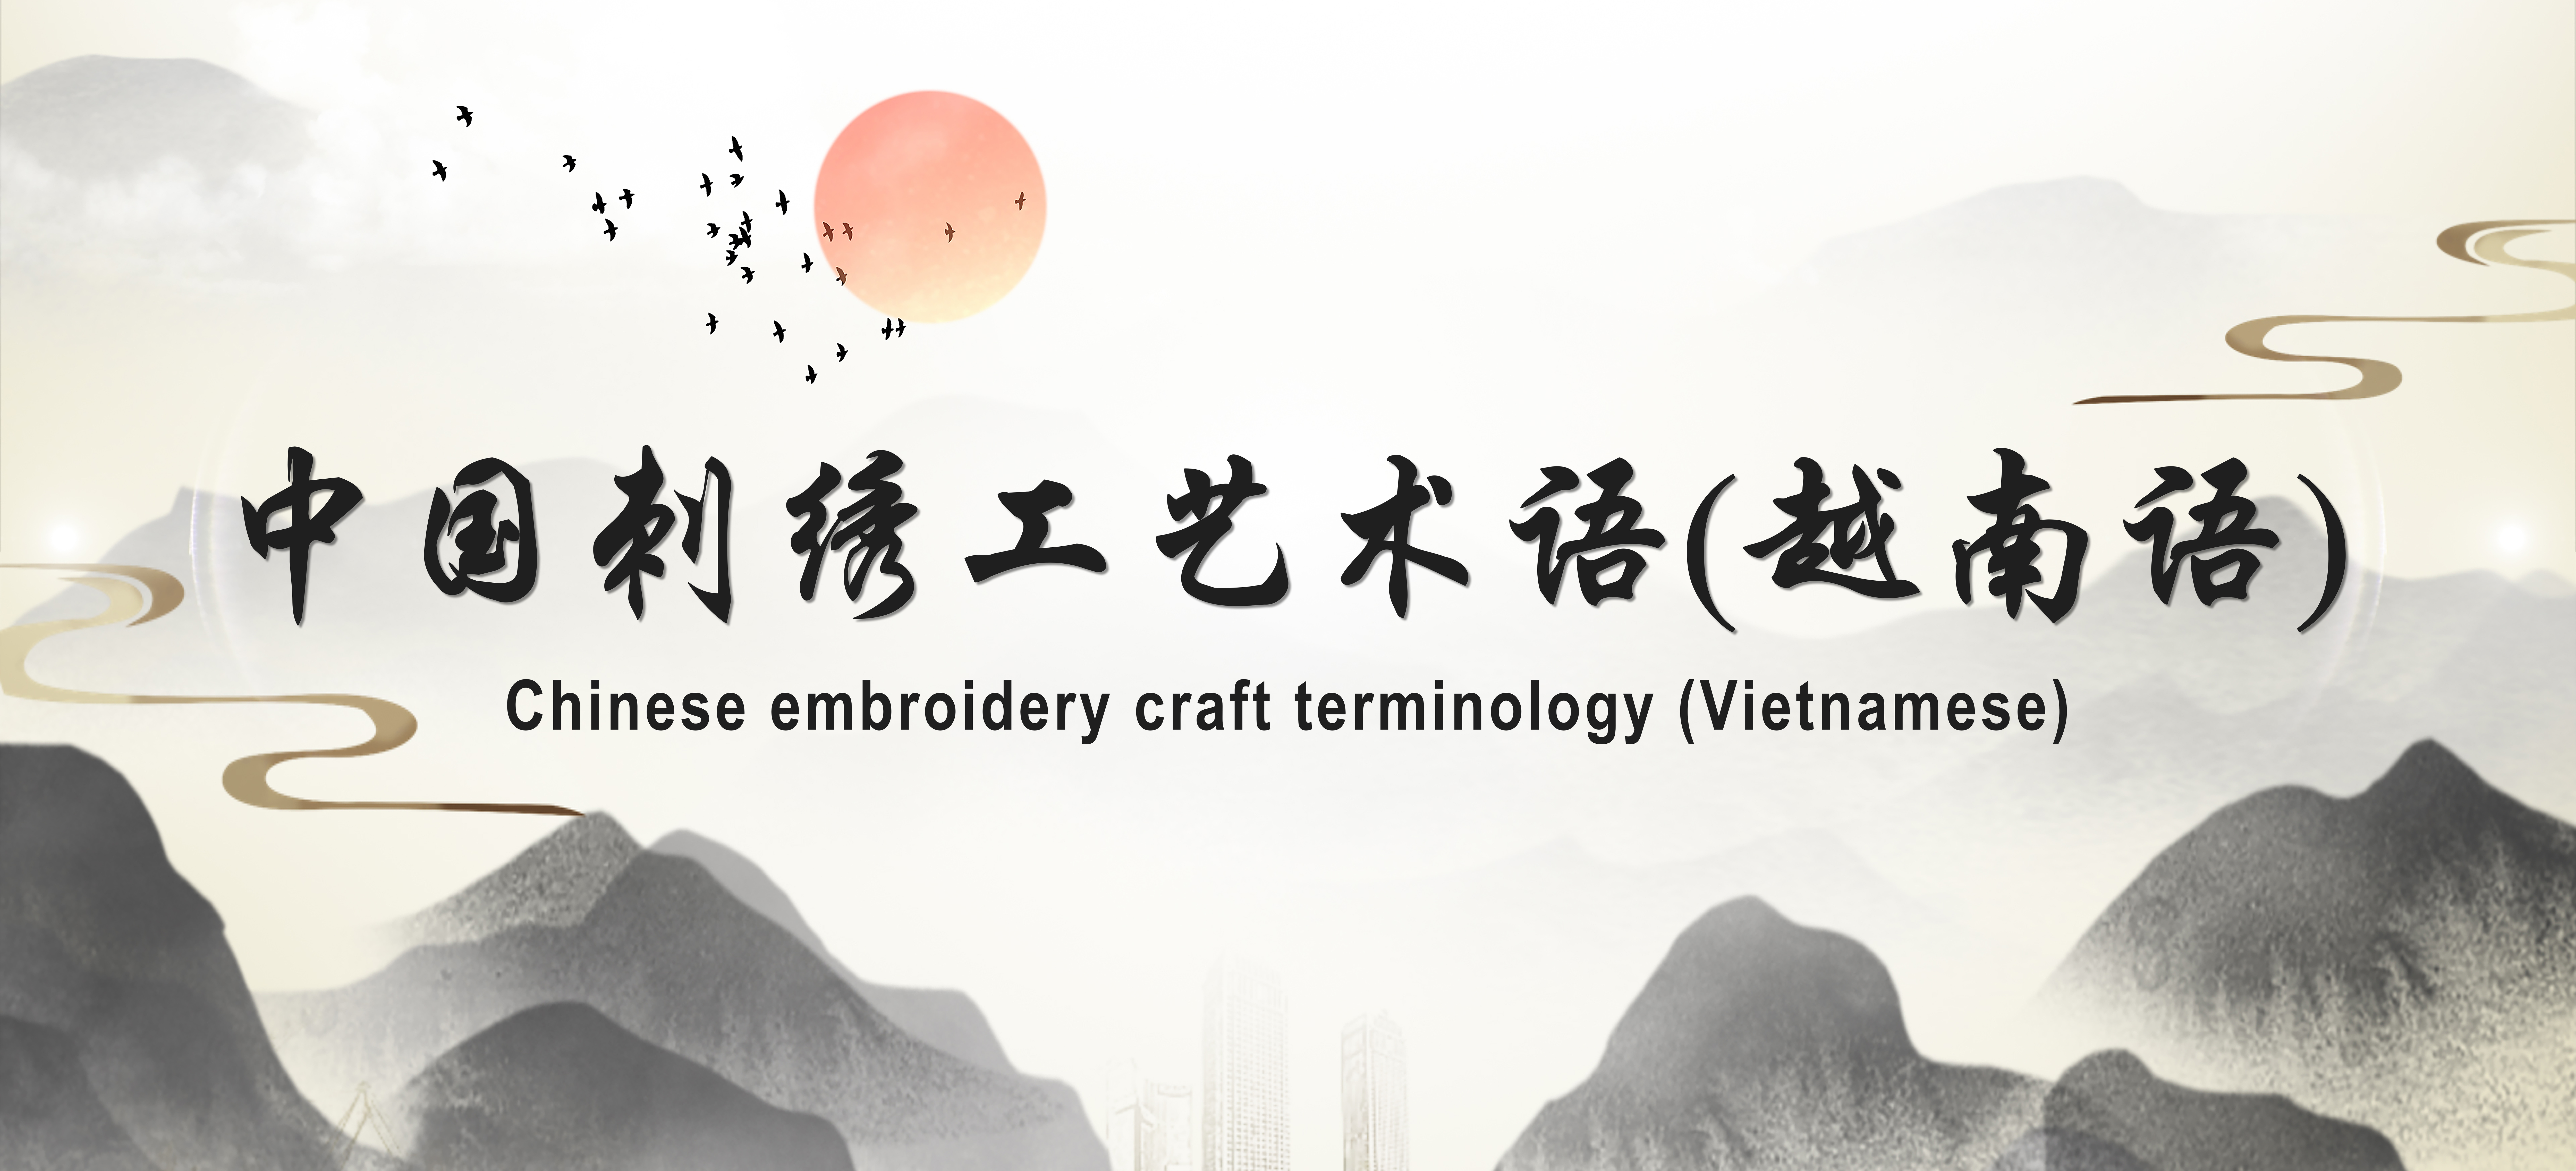 Chinese embroidery craft terminology (Vietnamese)